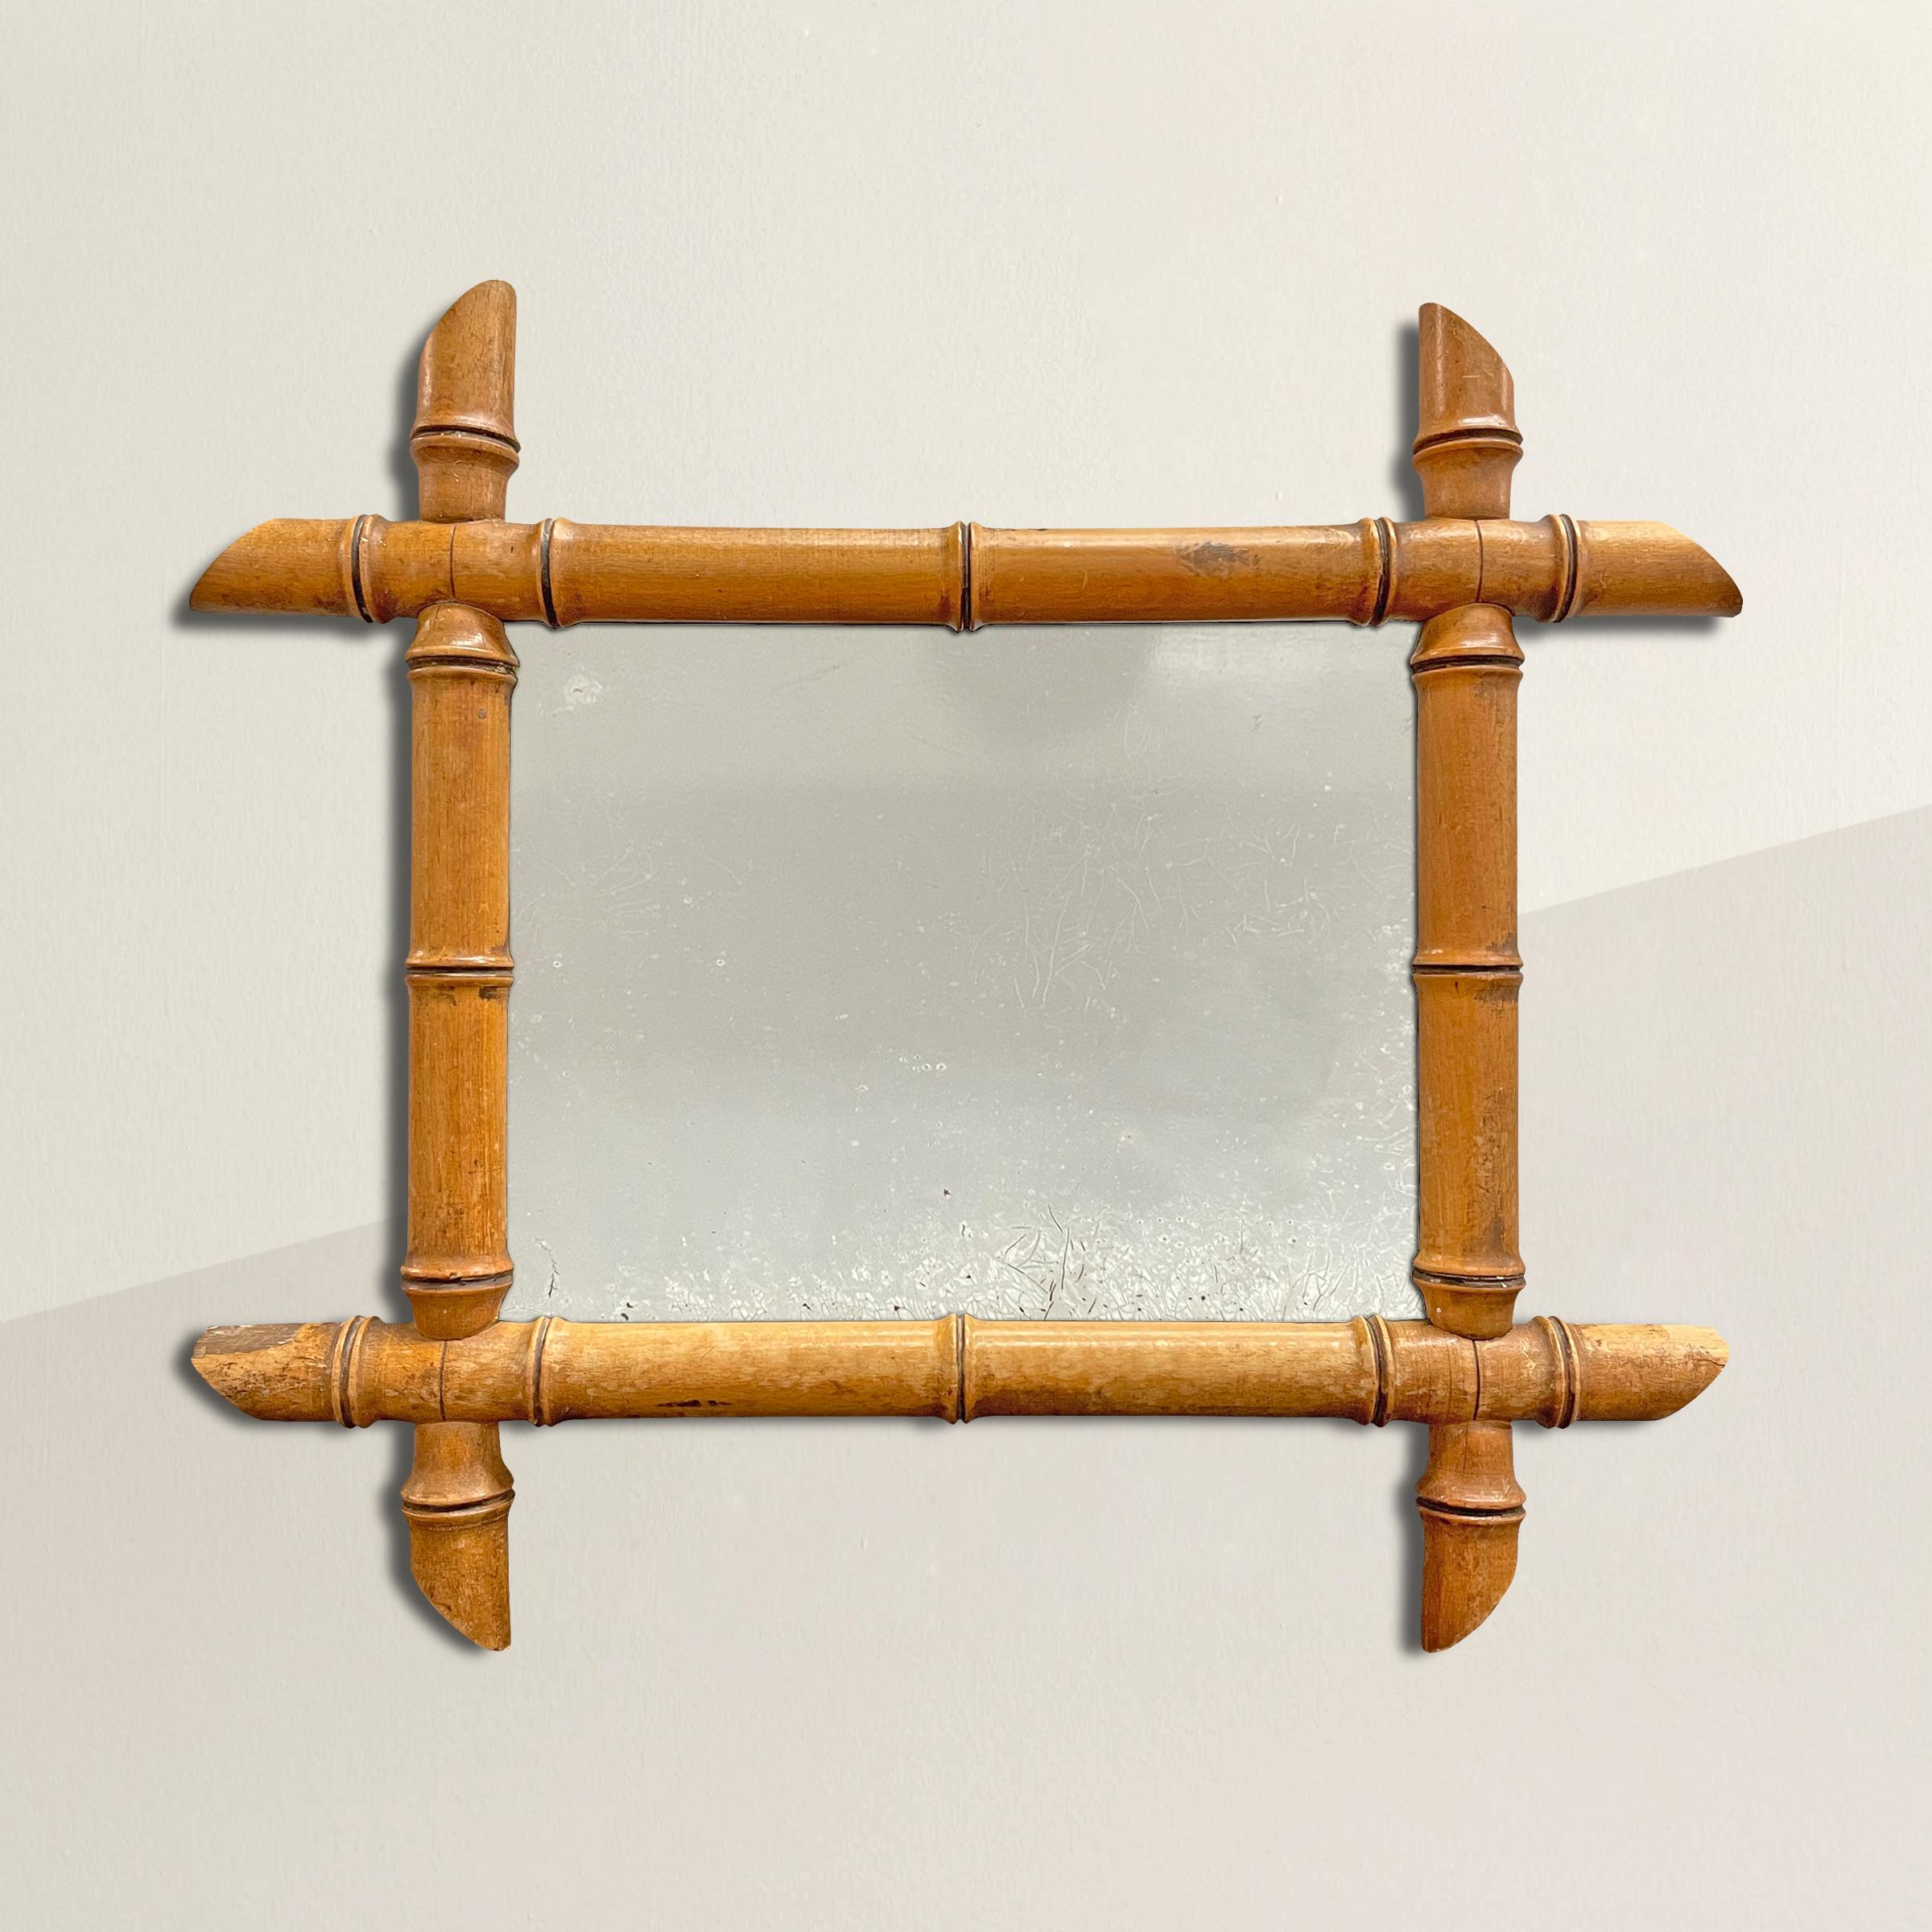 A charming early 20th century French maple framed mirror carved to mimic bamboo. The perfect mirror for a small bathroom, guest room, or anywhere you need a little sparkle.